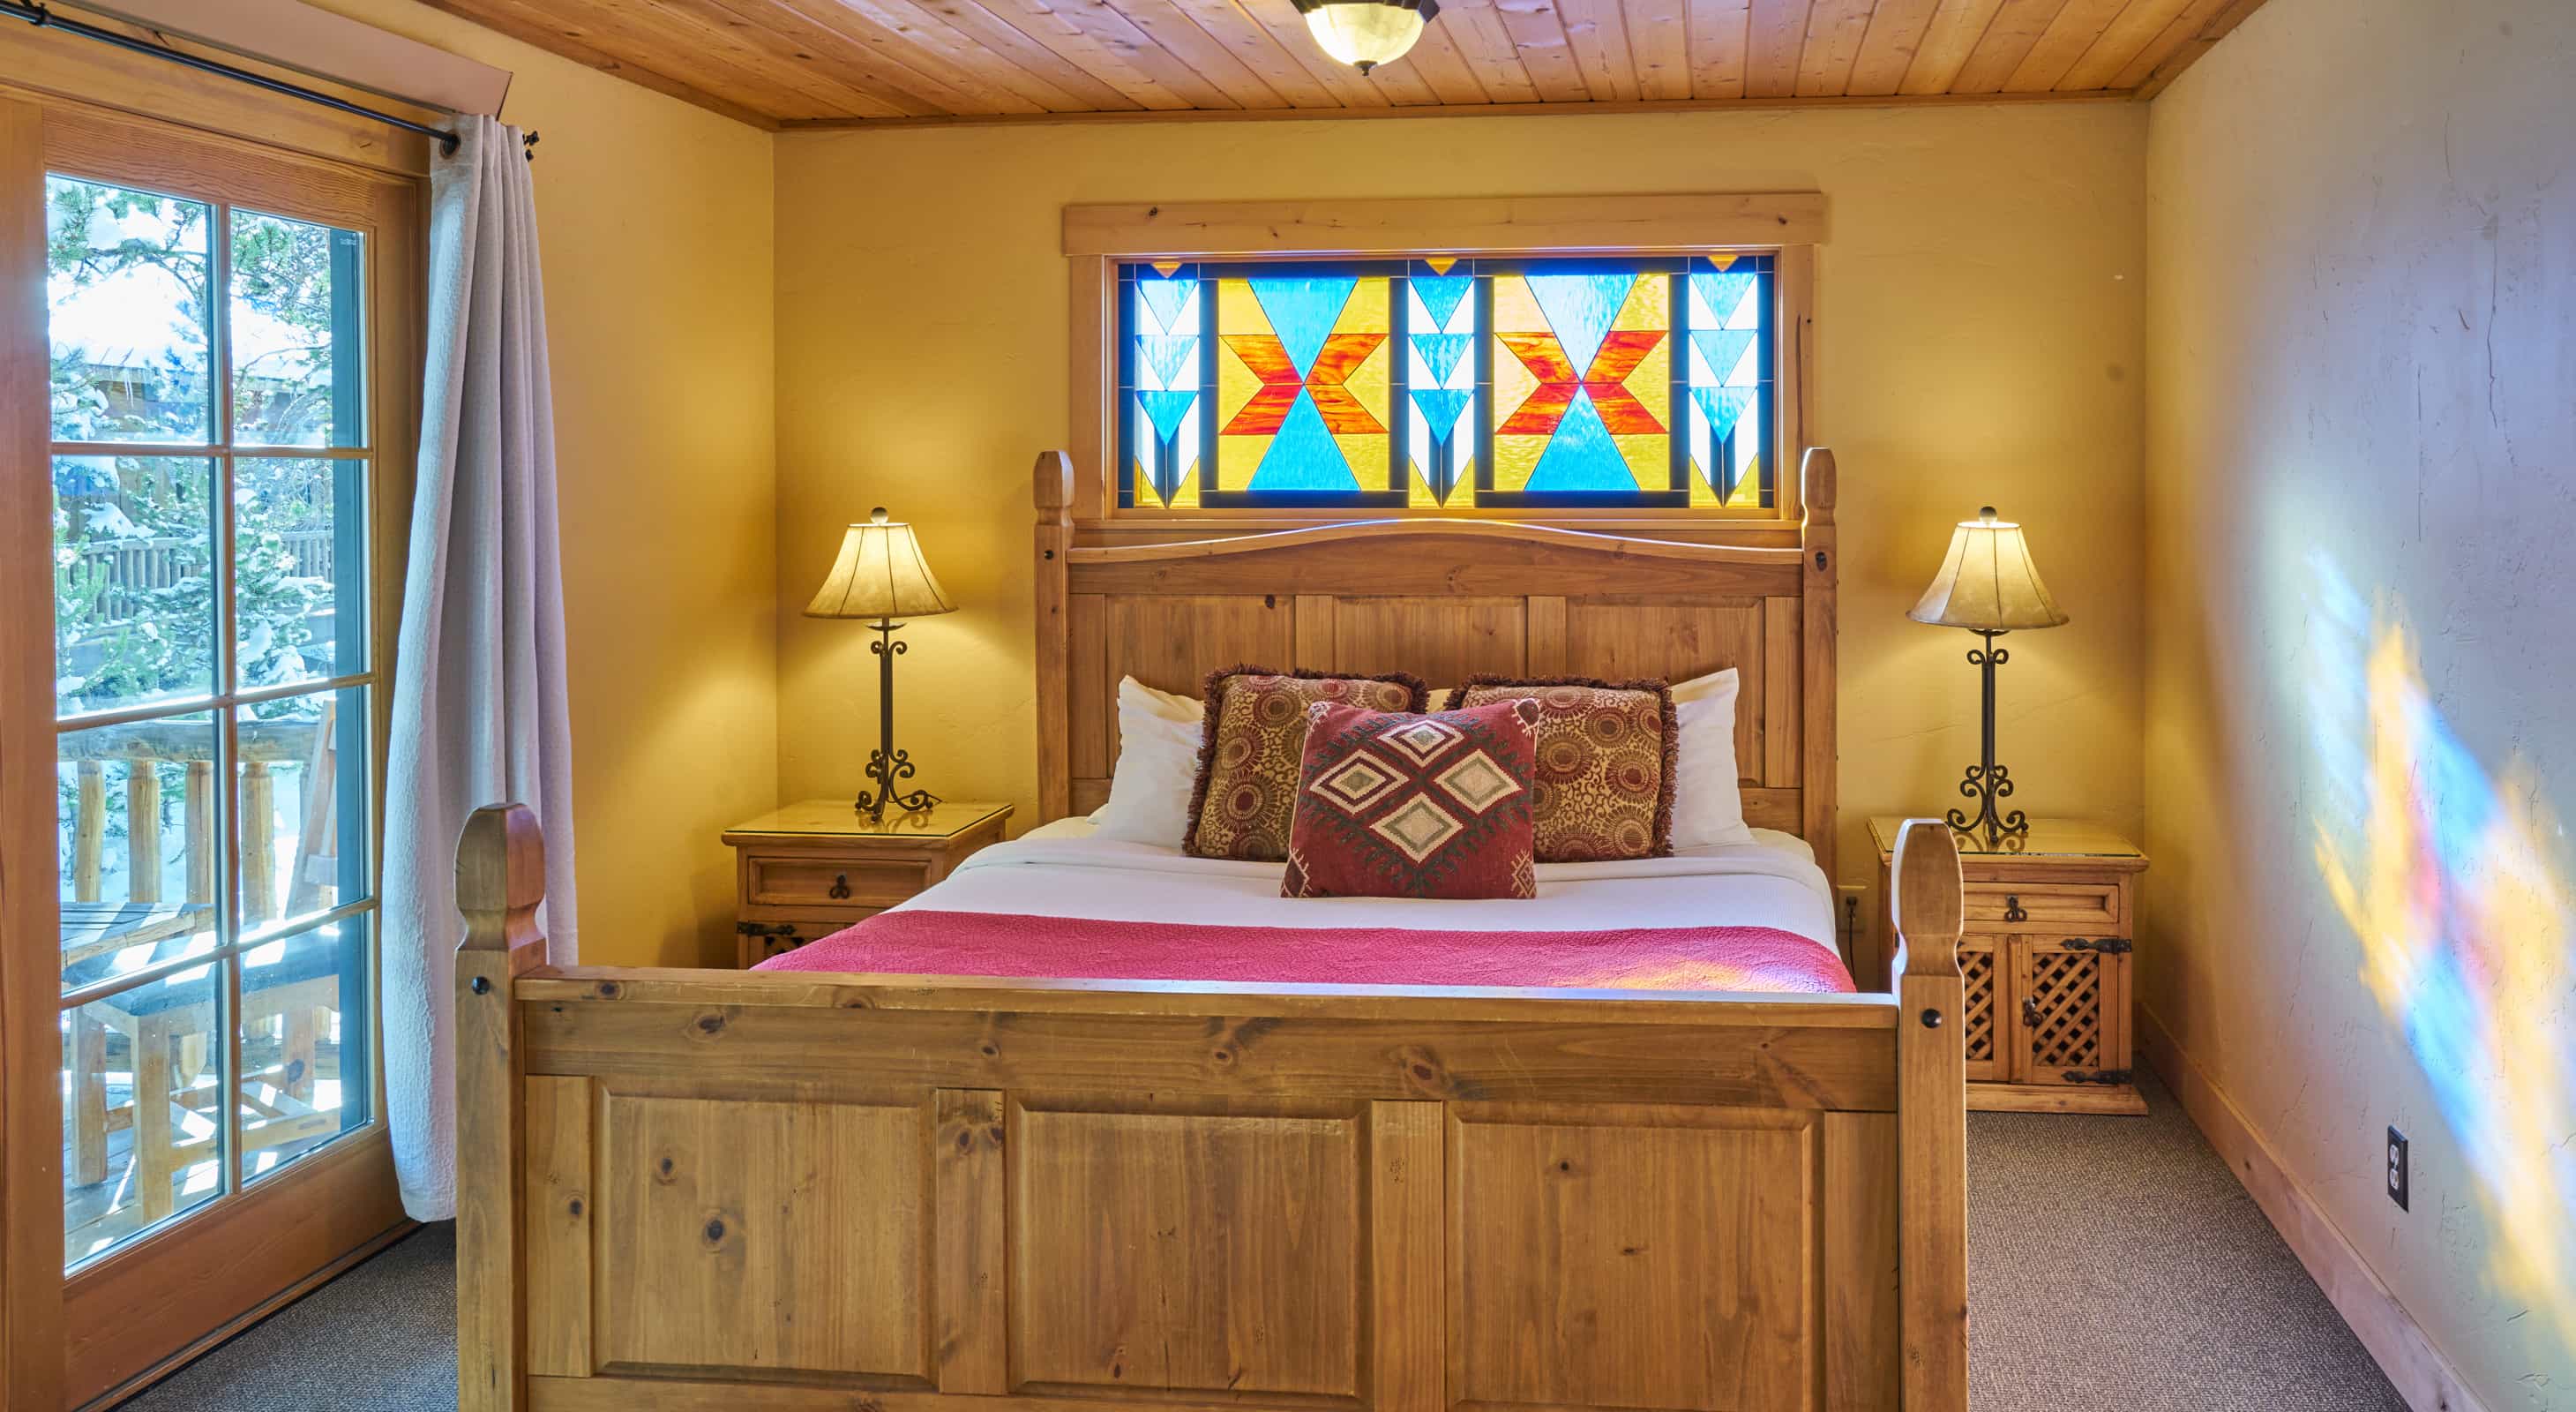 Mariposa bed with stained glass above the headboard